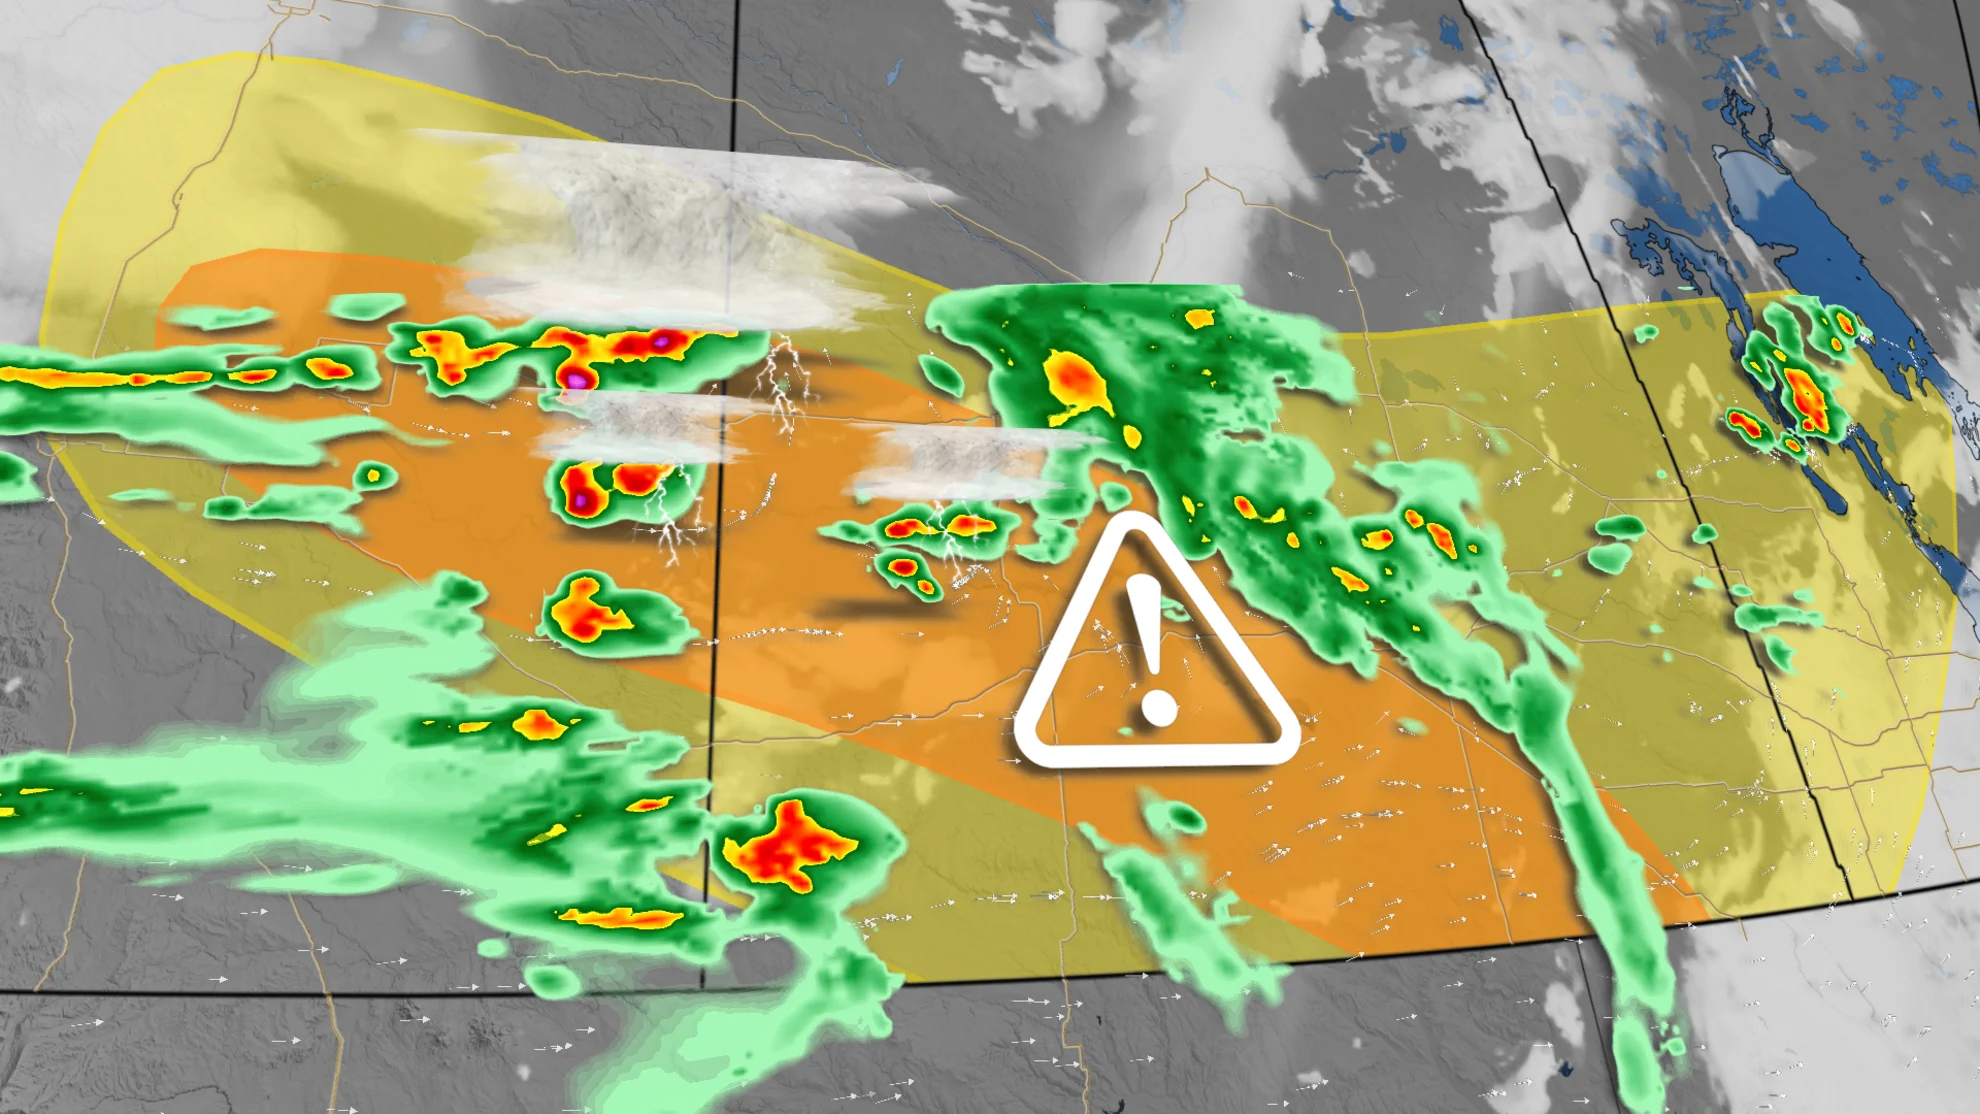 Severe thunderstorm threat emerges over the Prairies, risk of tornadoes